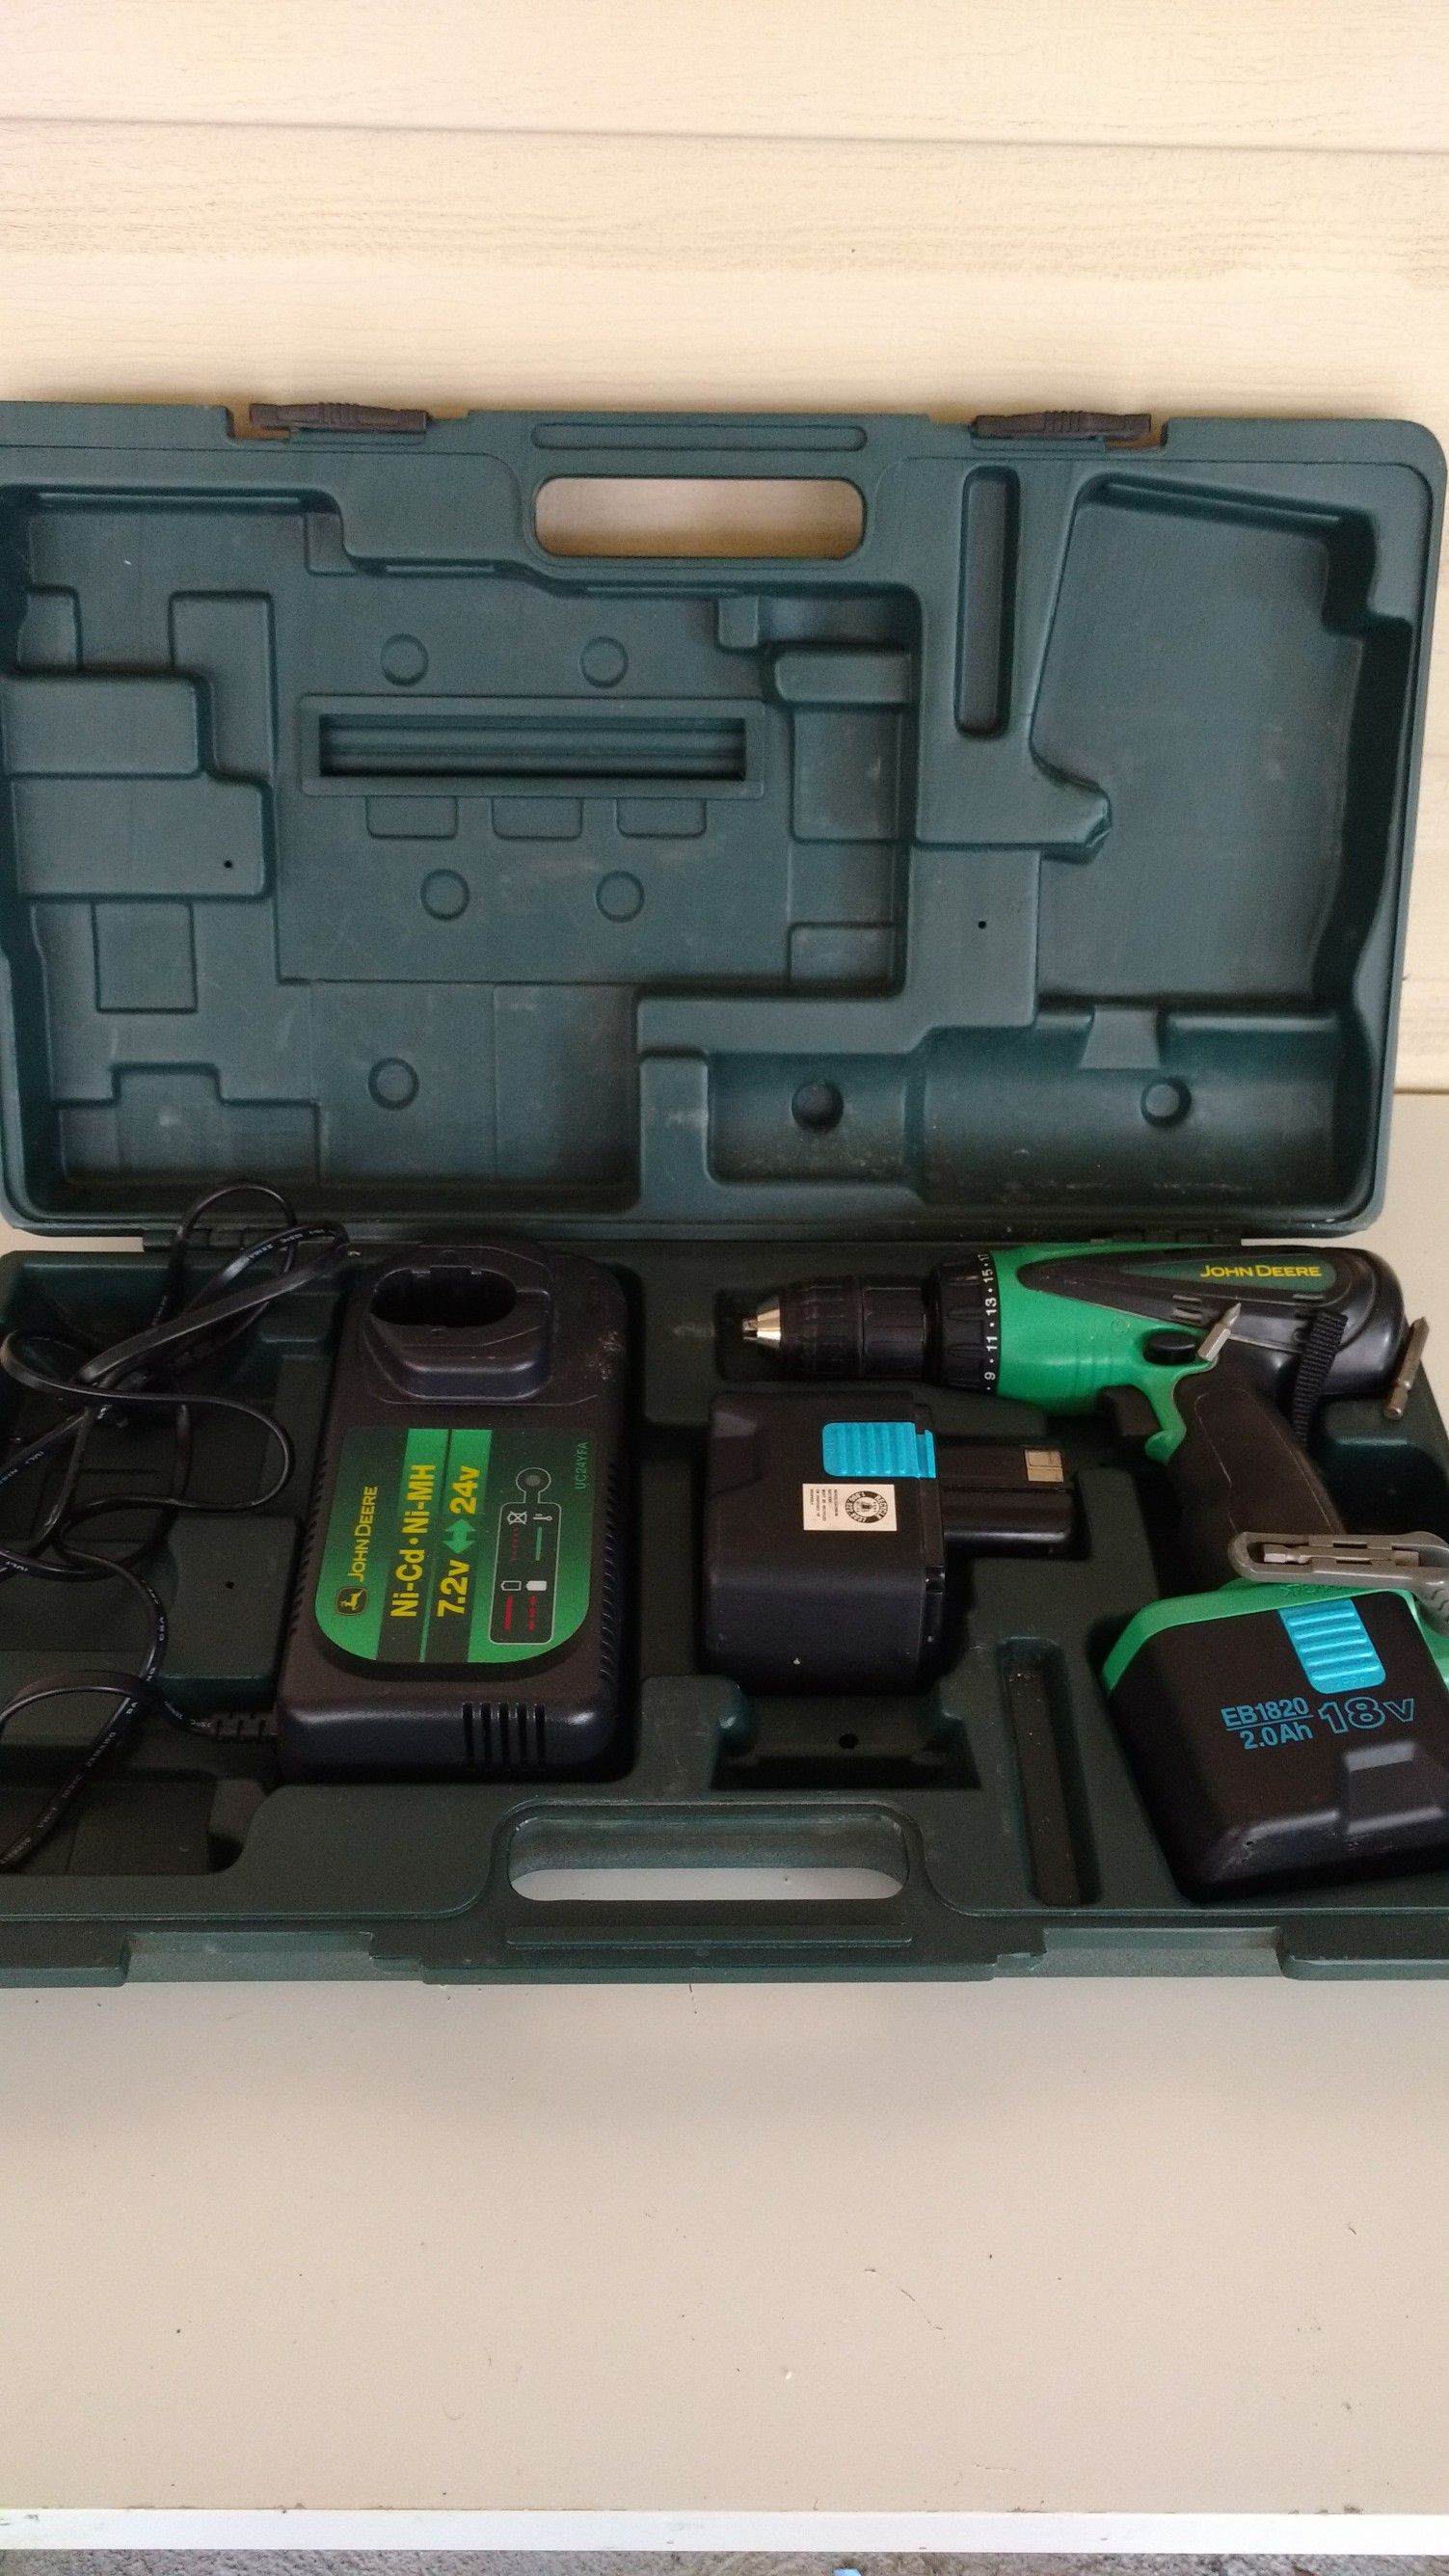 John Deere power drill with extra battery and case